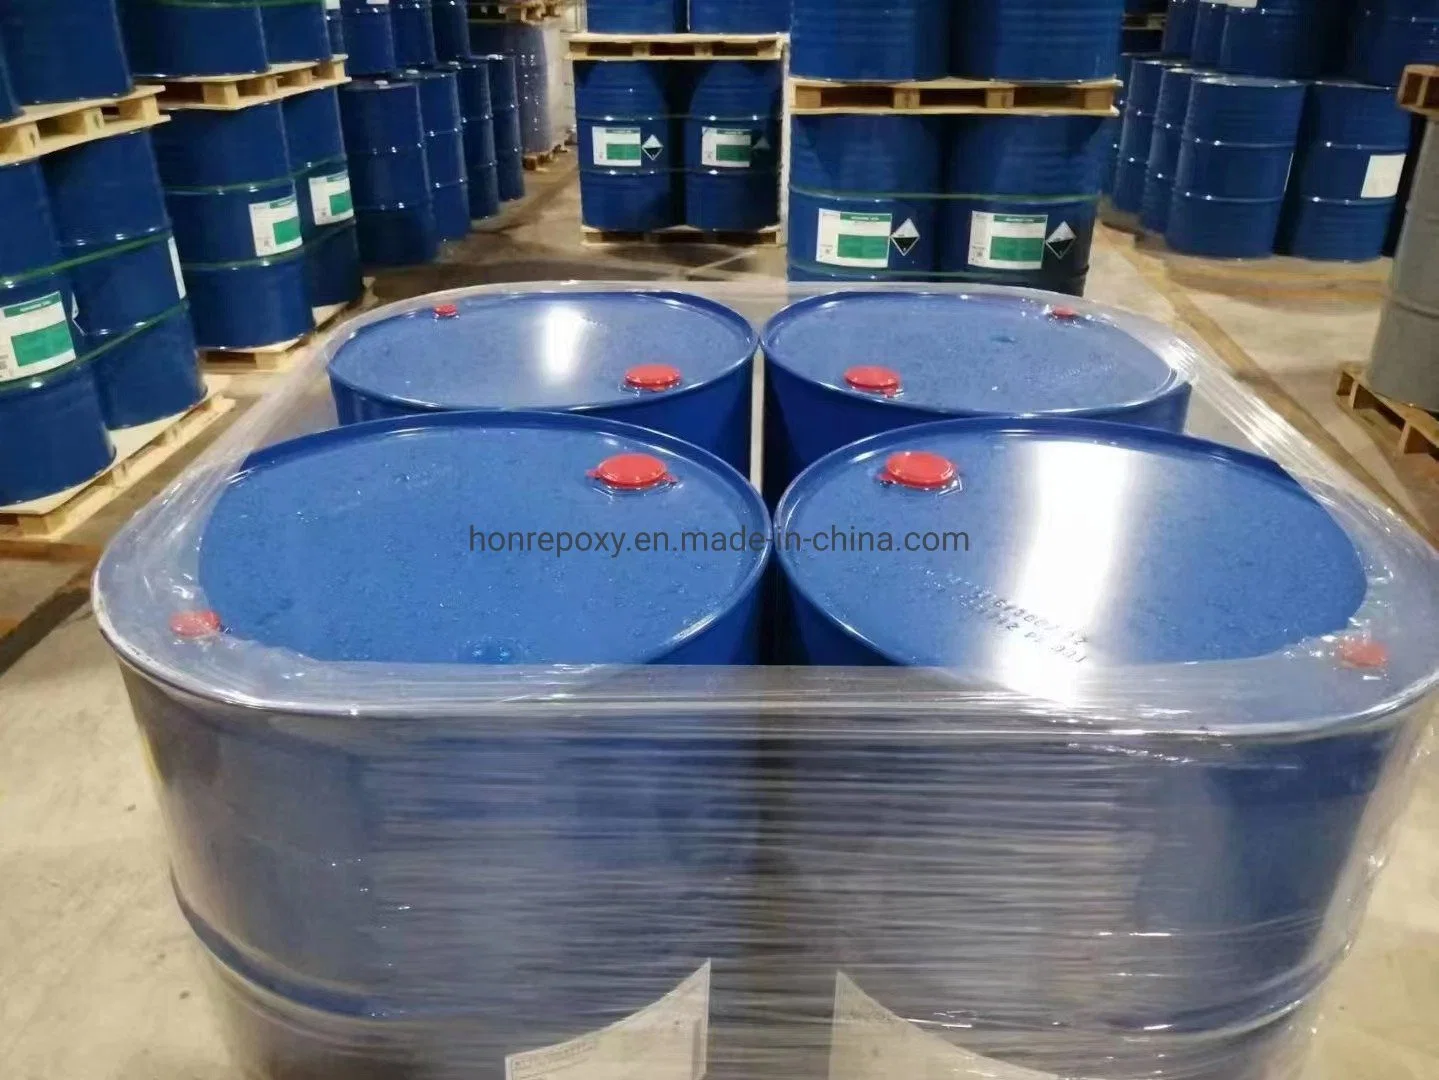 Factory Supply Epoxy Hardener 1619 Ued in Industrial Flooring Field--Thin Coating Type and Self-Leveling Type